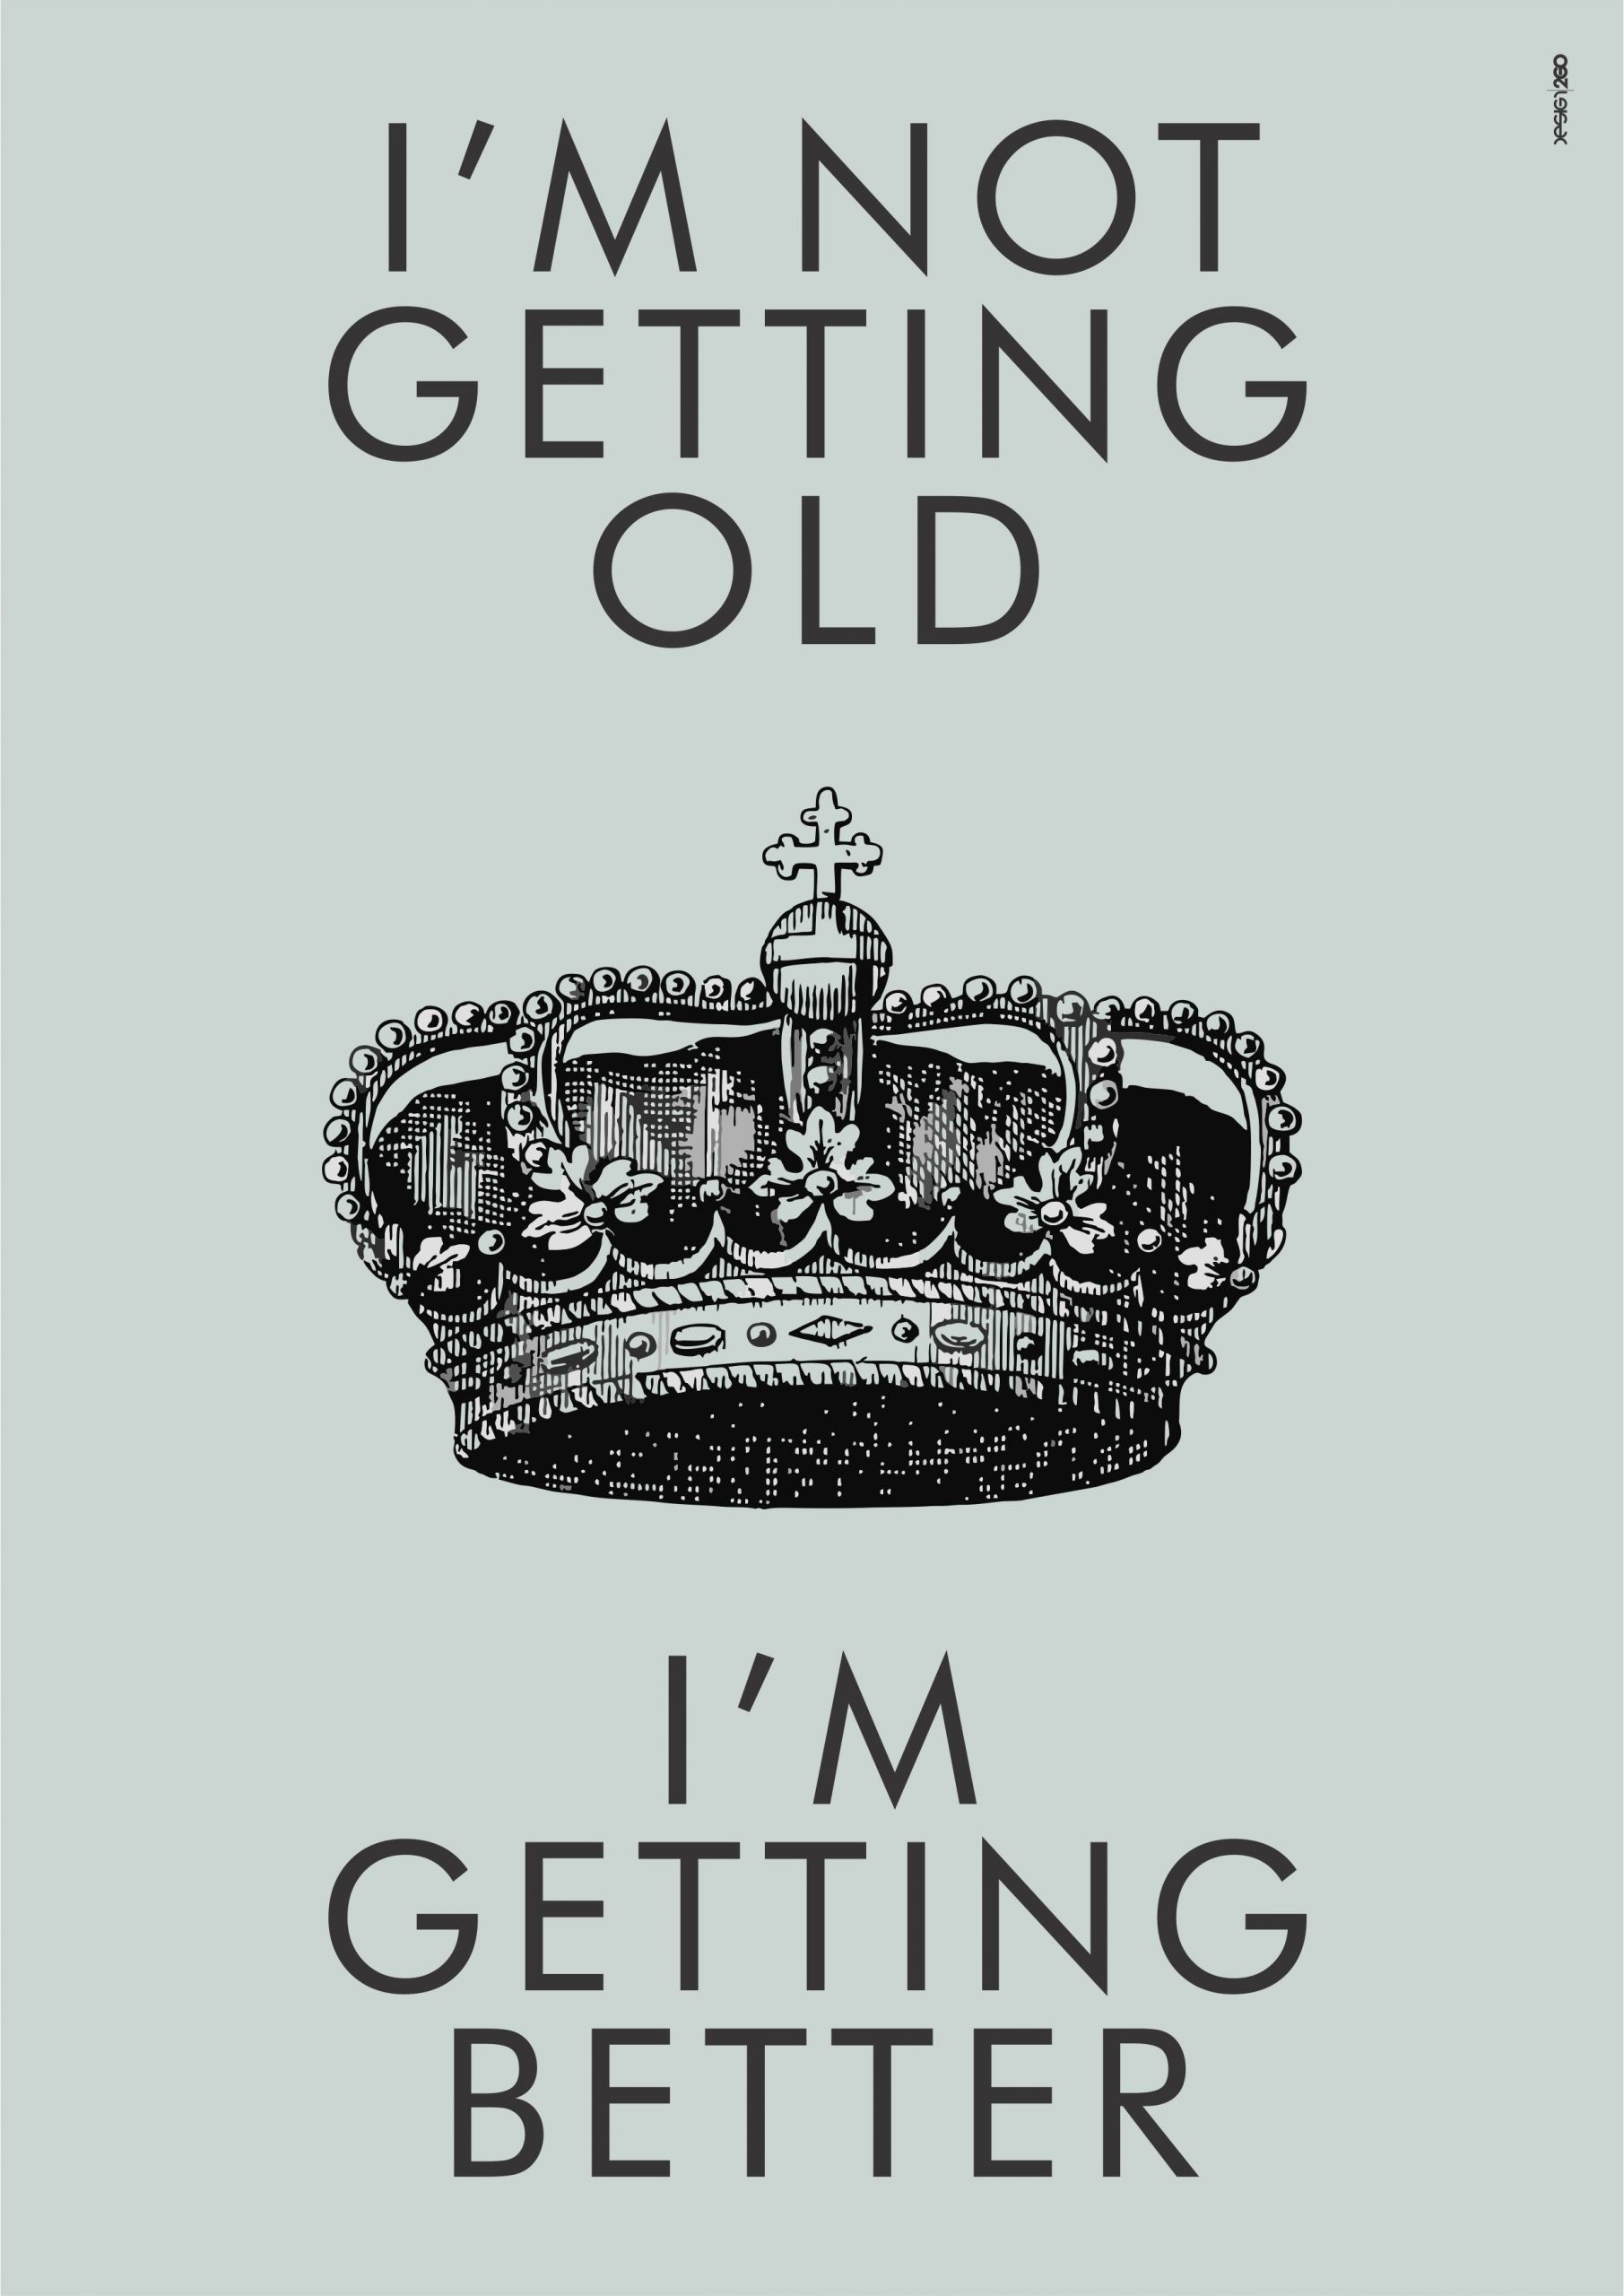 Happy Birthday To Me Quotes Funny
 I m not ting old I m ting better birthday quote